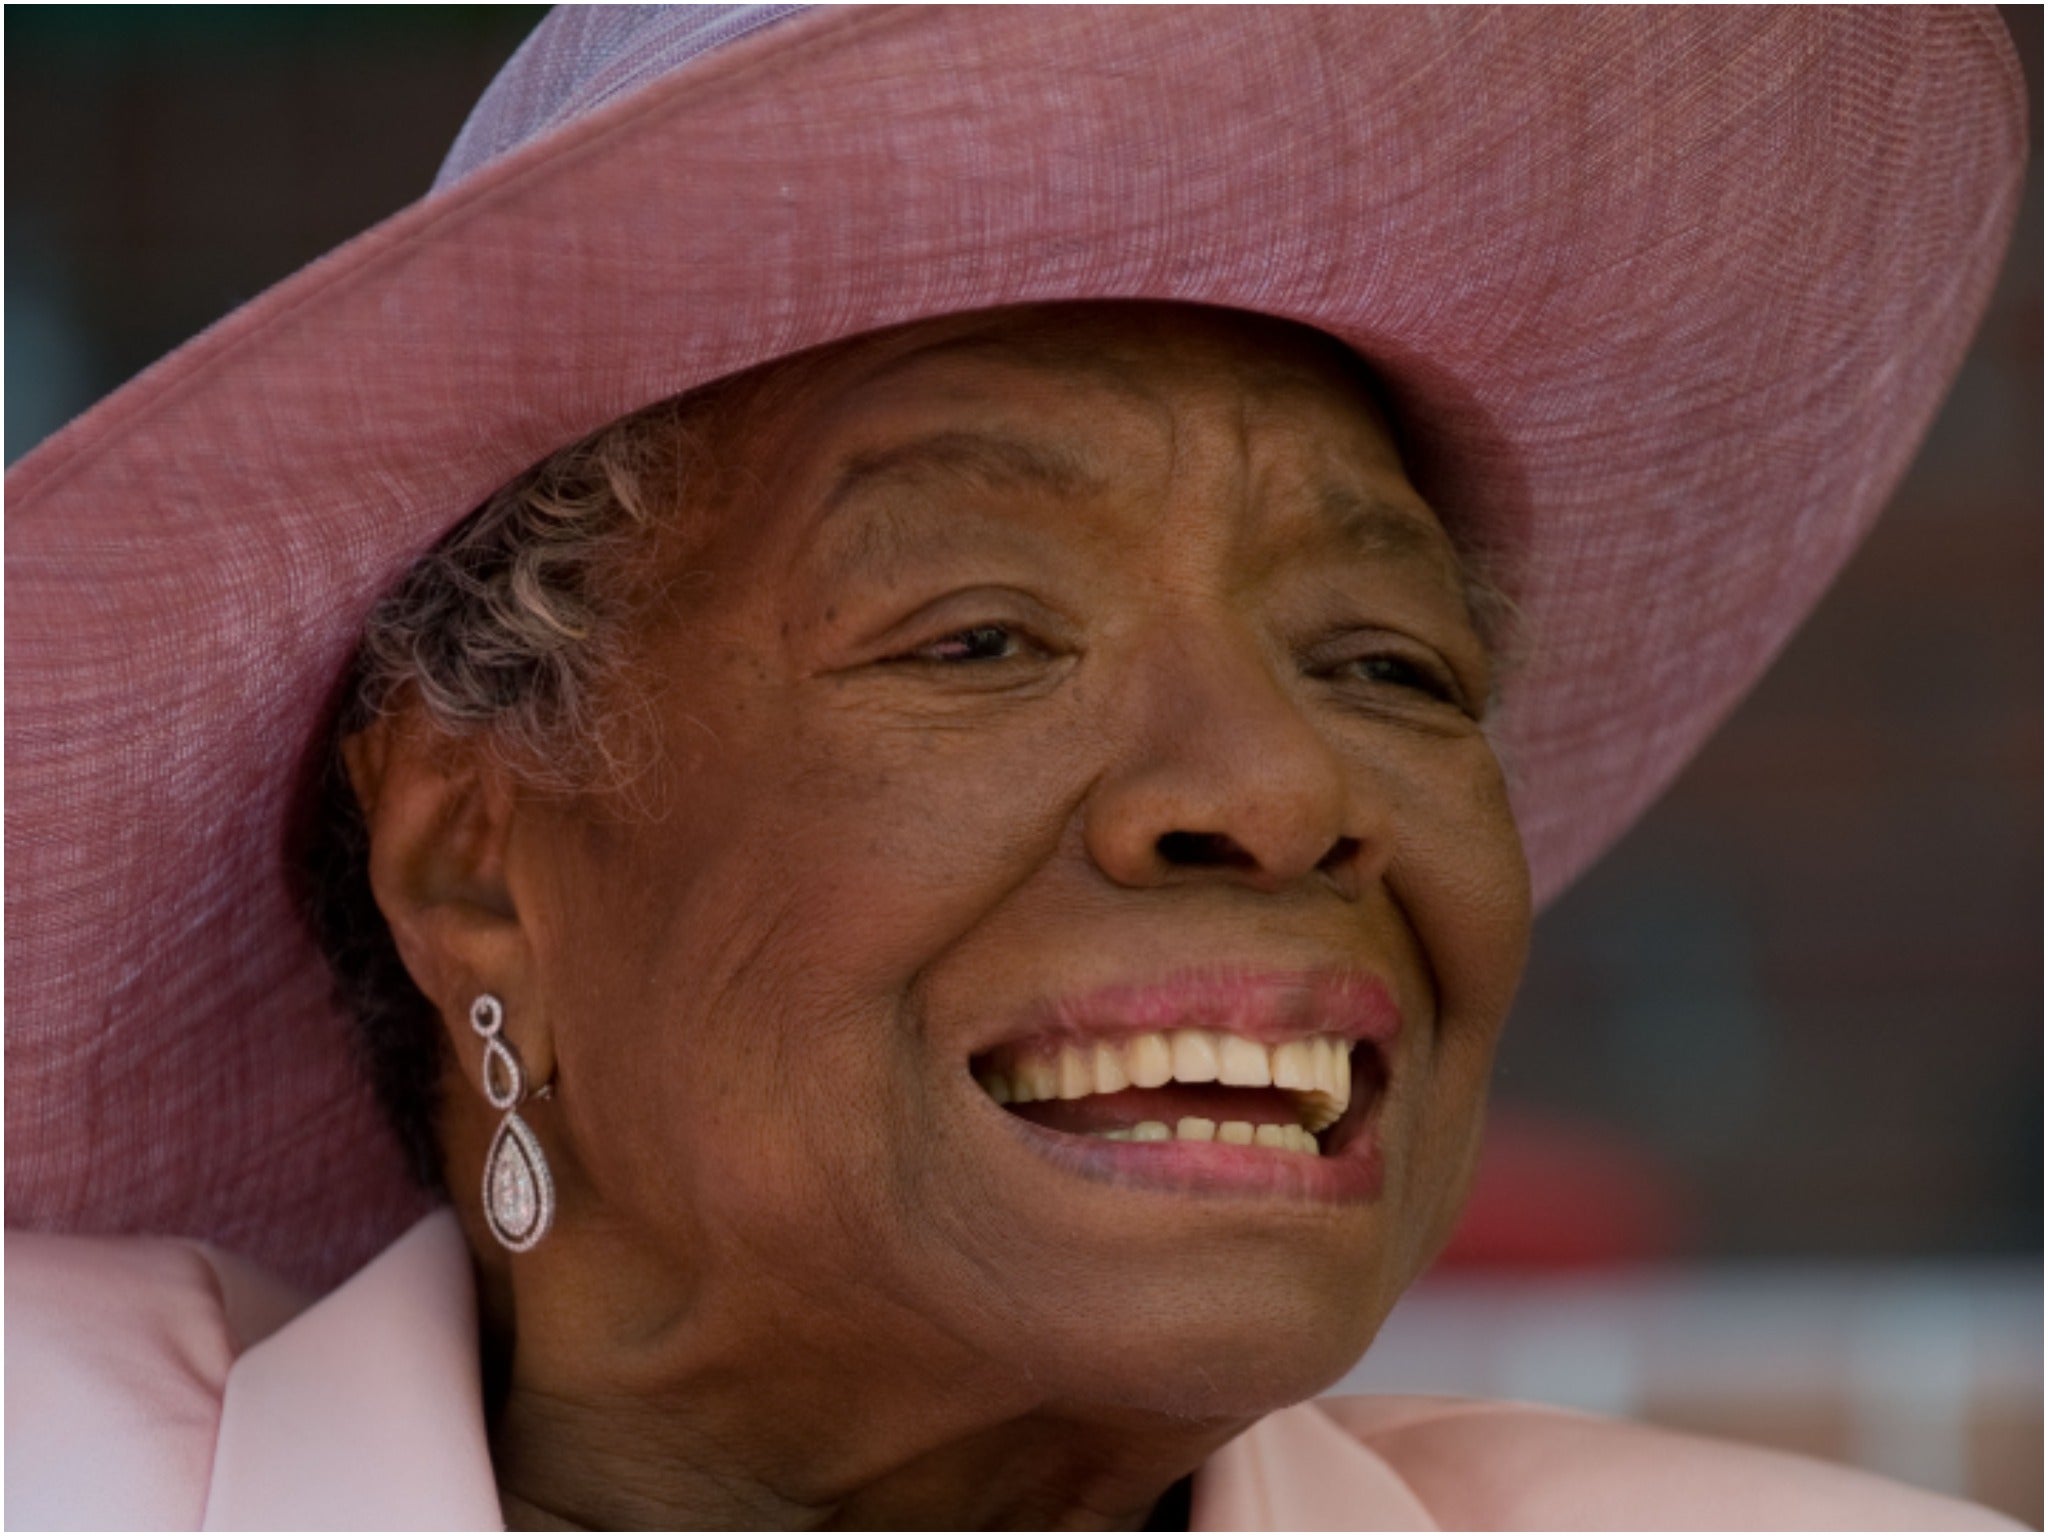 File: American author, poet and activist Maya Angelou died in 2014 at the age of 86